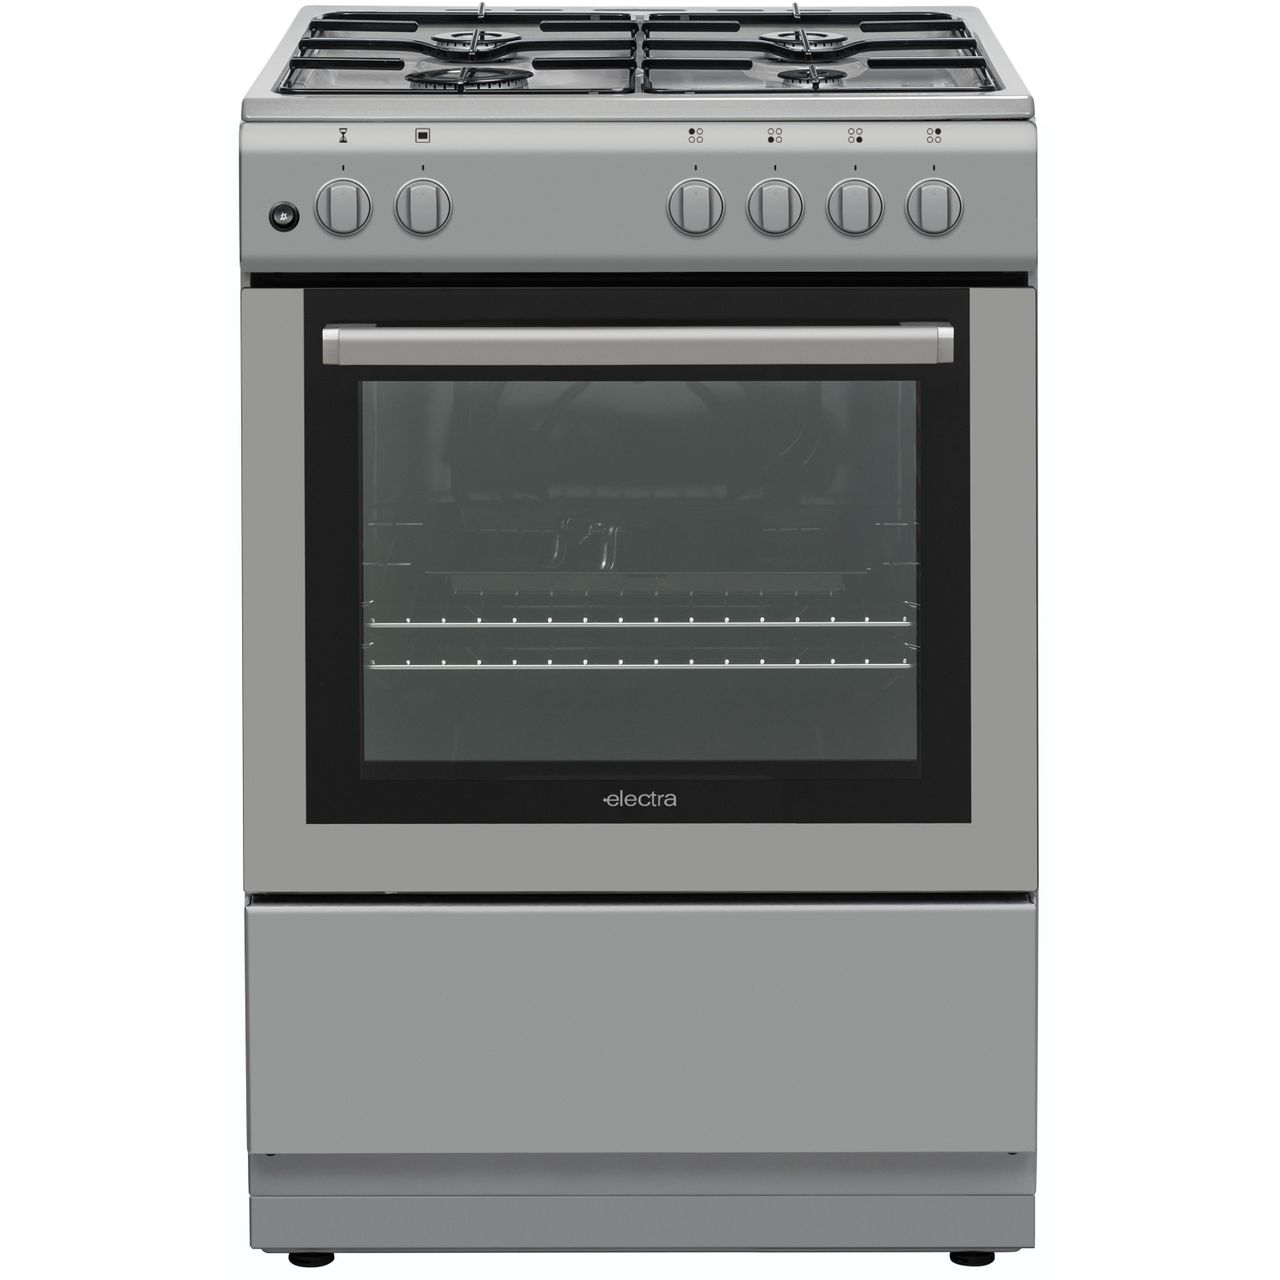 Electra SG60S Gas Cooker Review